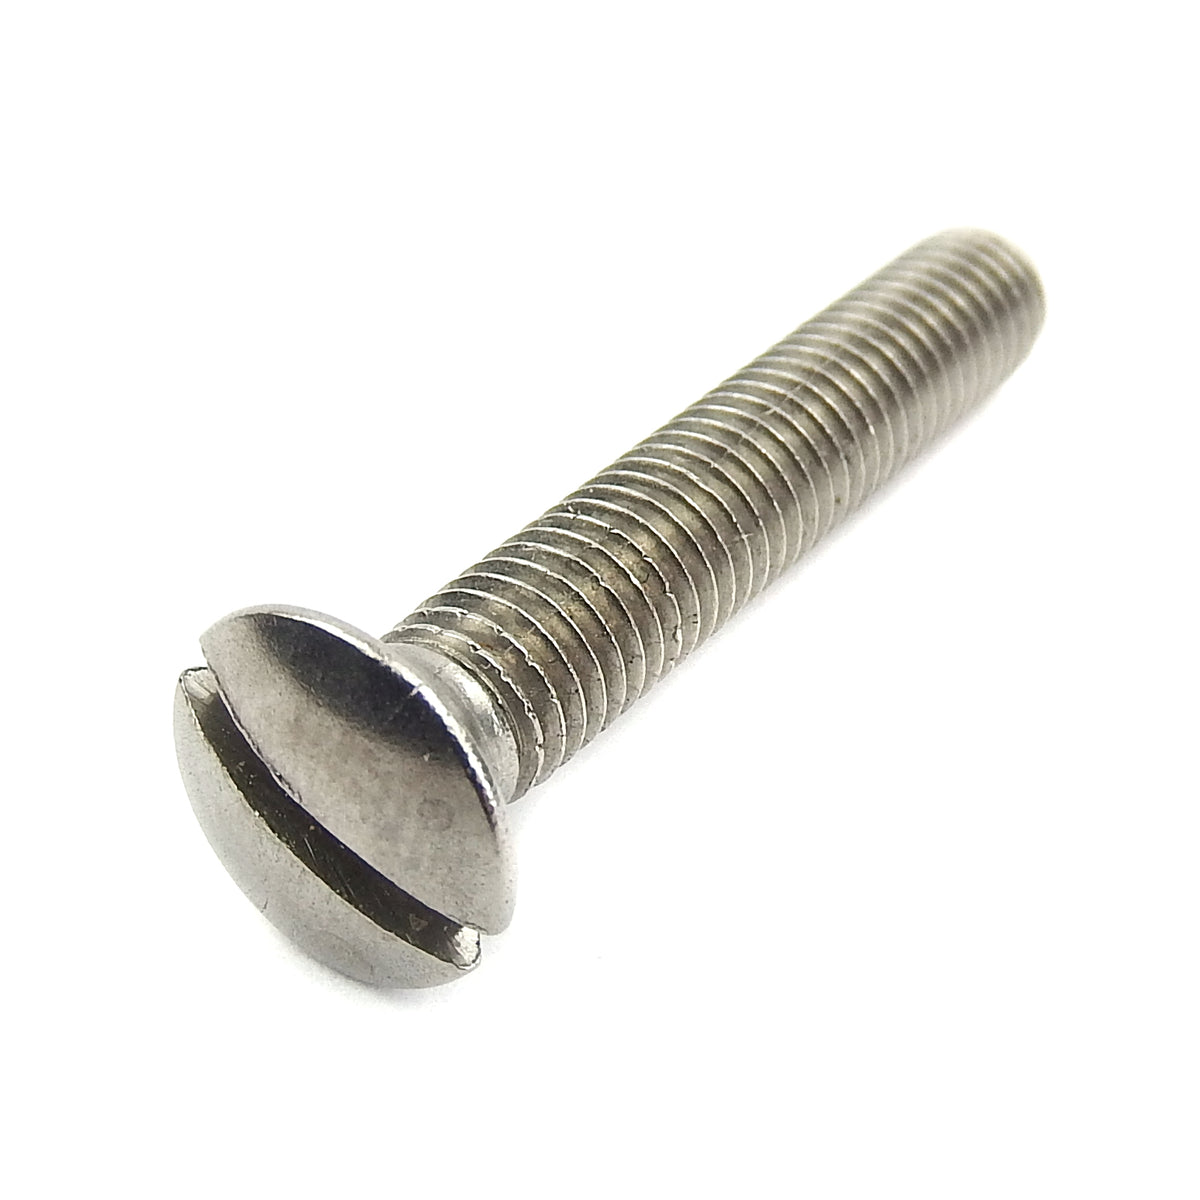 Counter Sunk Raised Screw M4 x 10mm Stainless